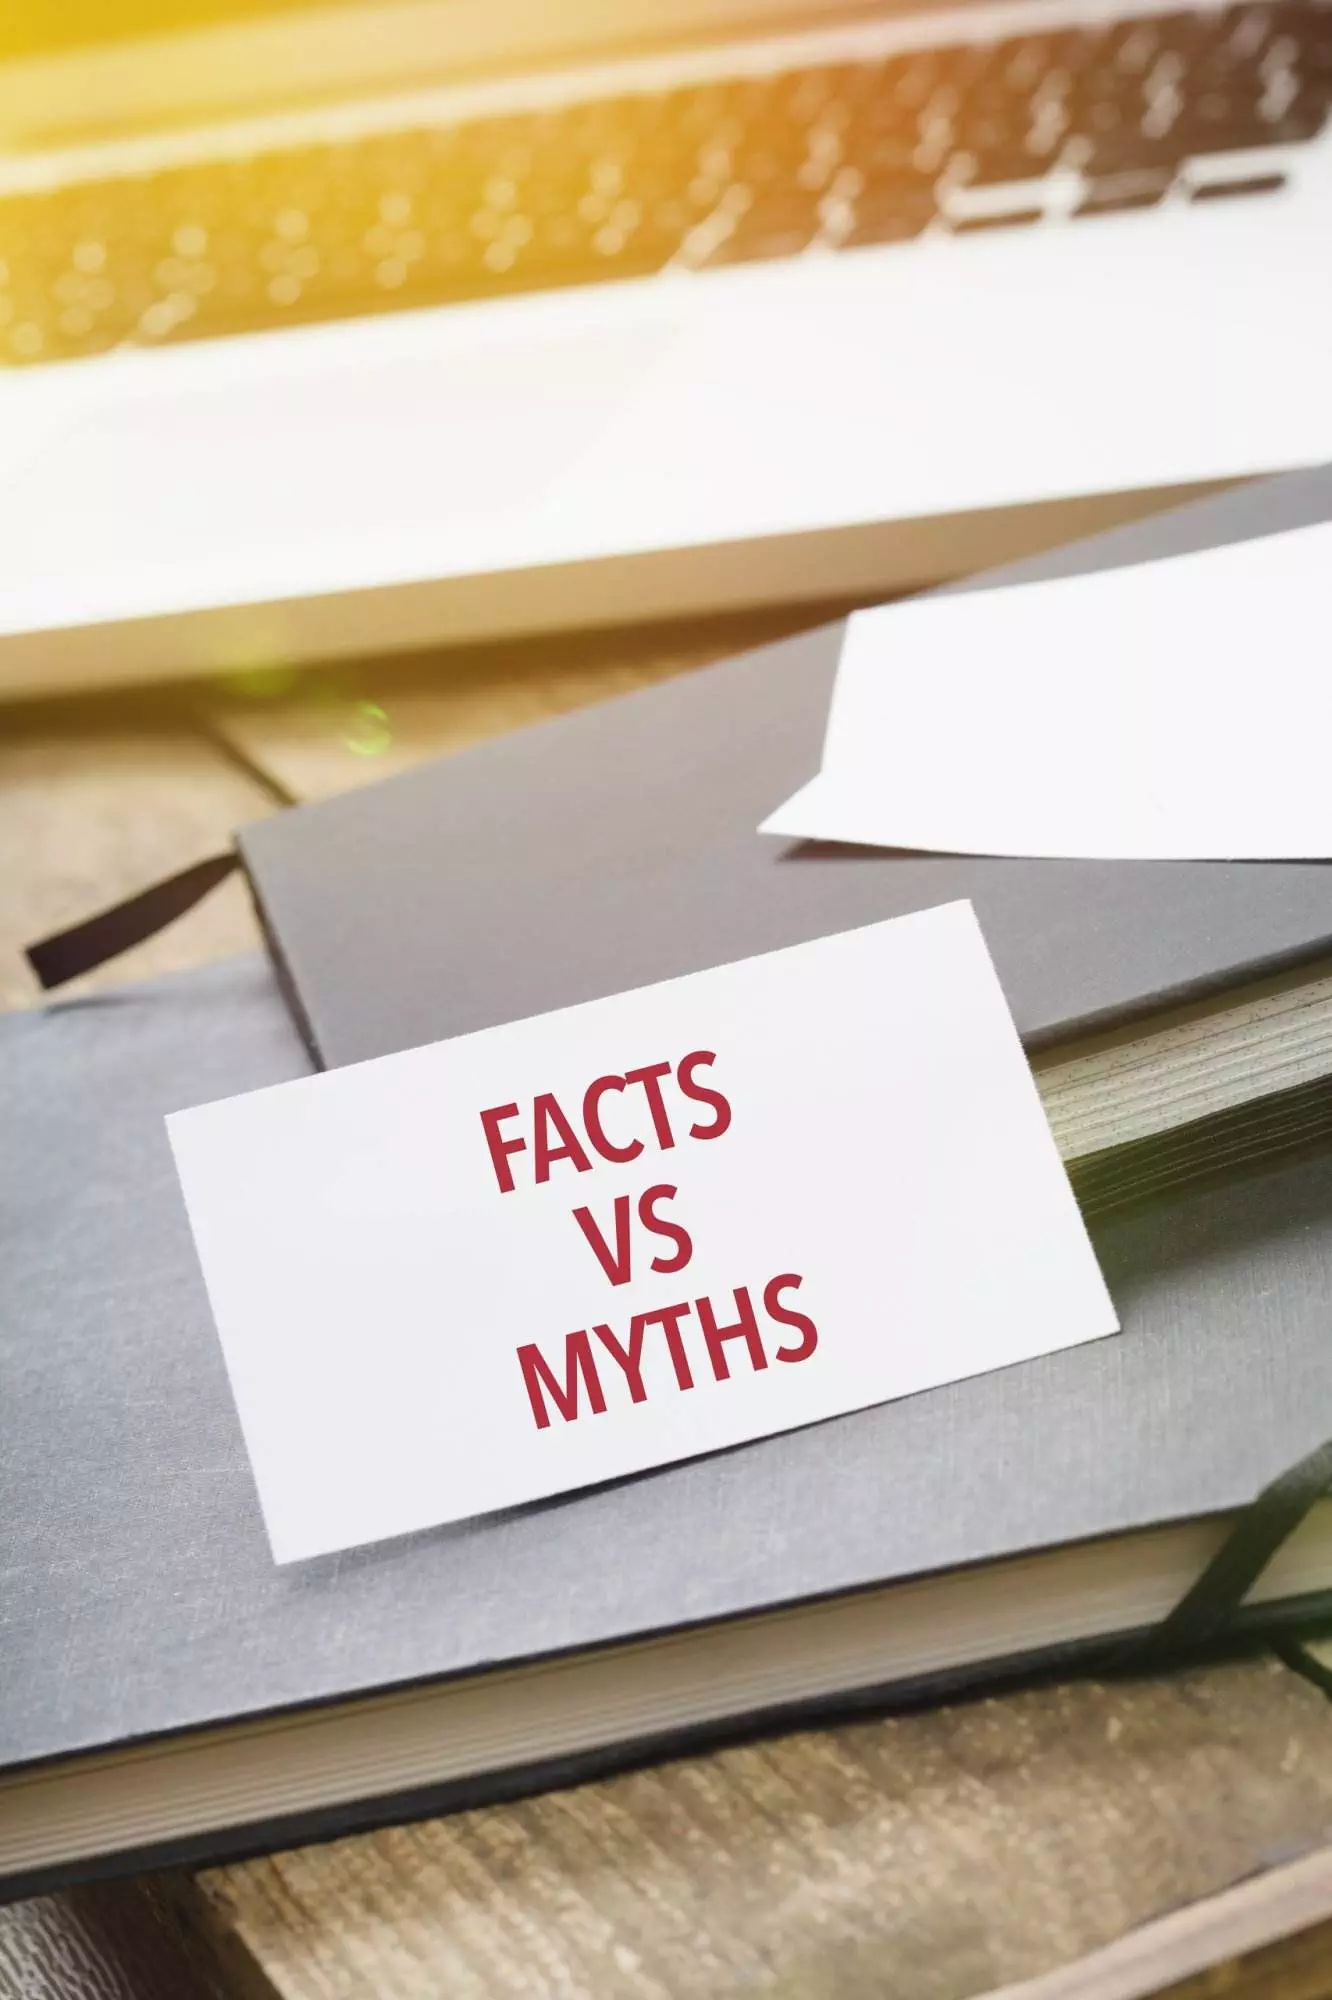 Facts vs Myths card on open book.